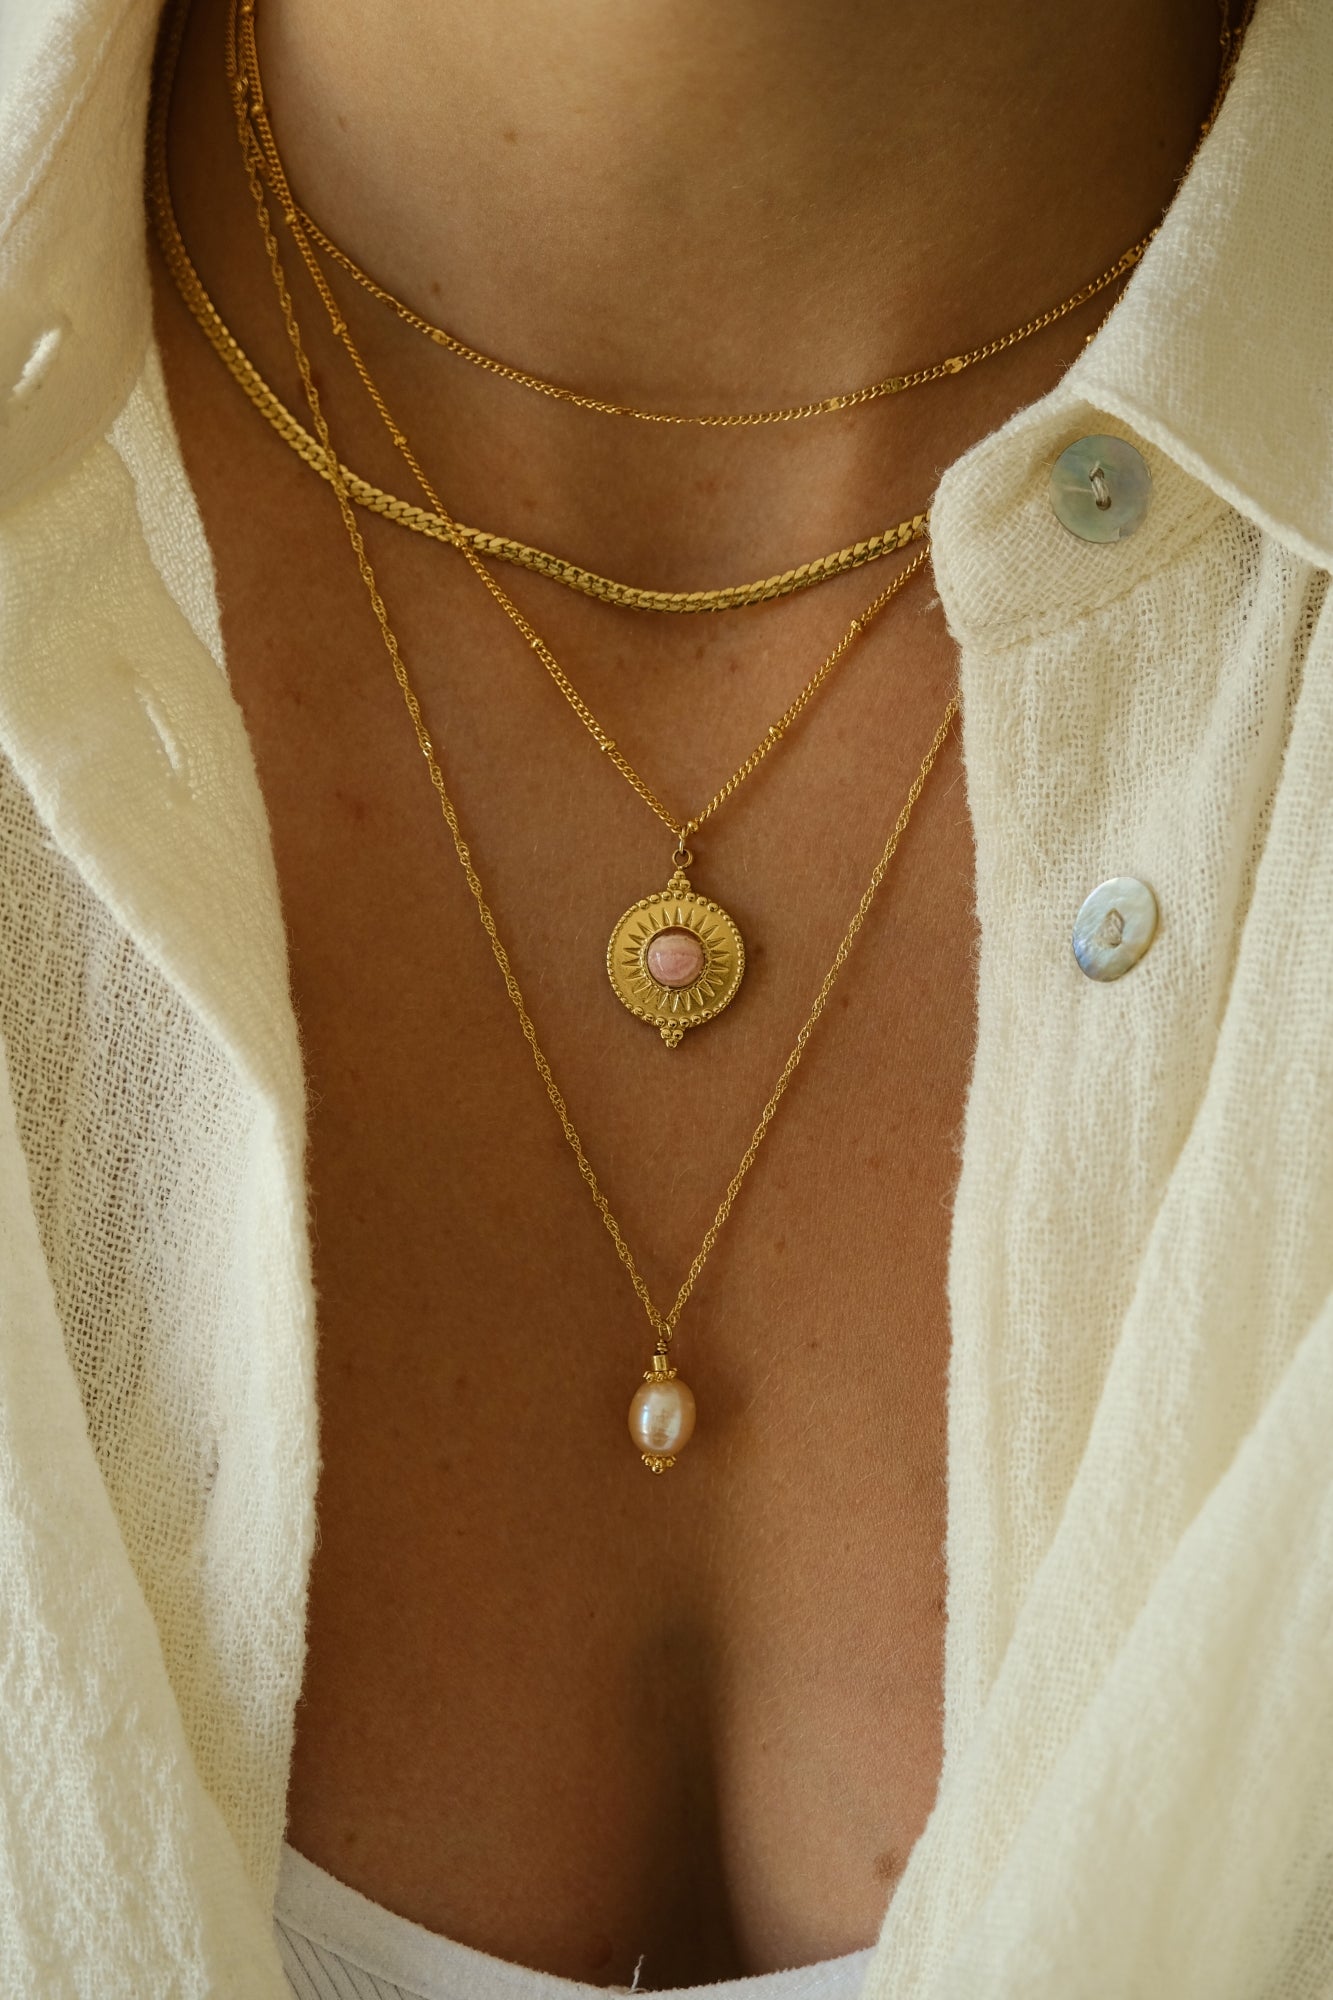 “Breathe” necklace (of your choice)